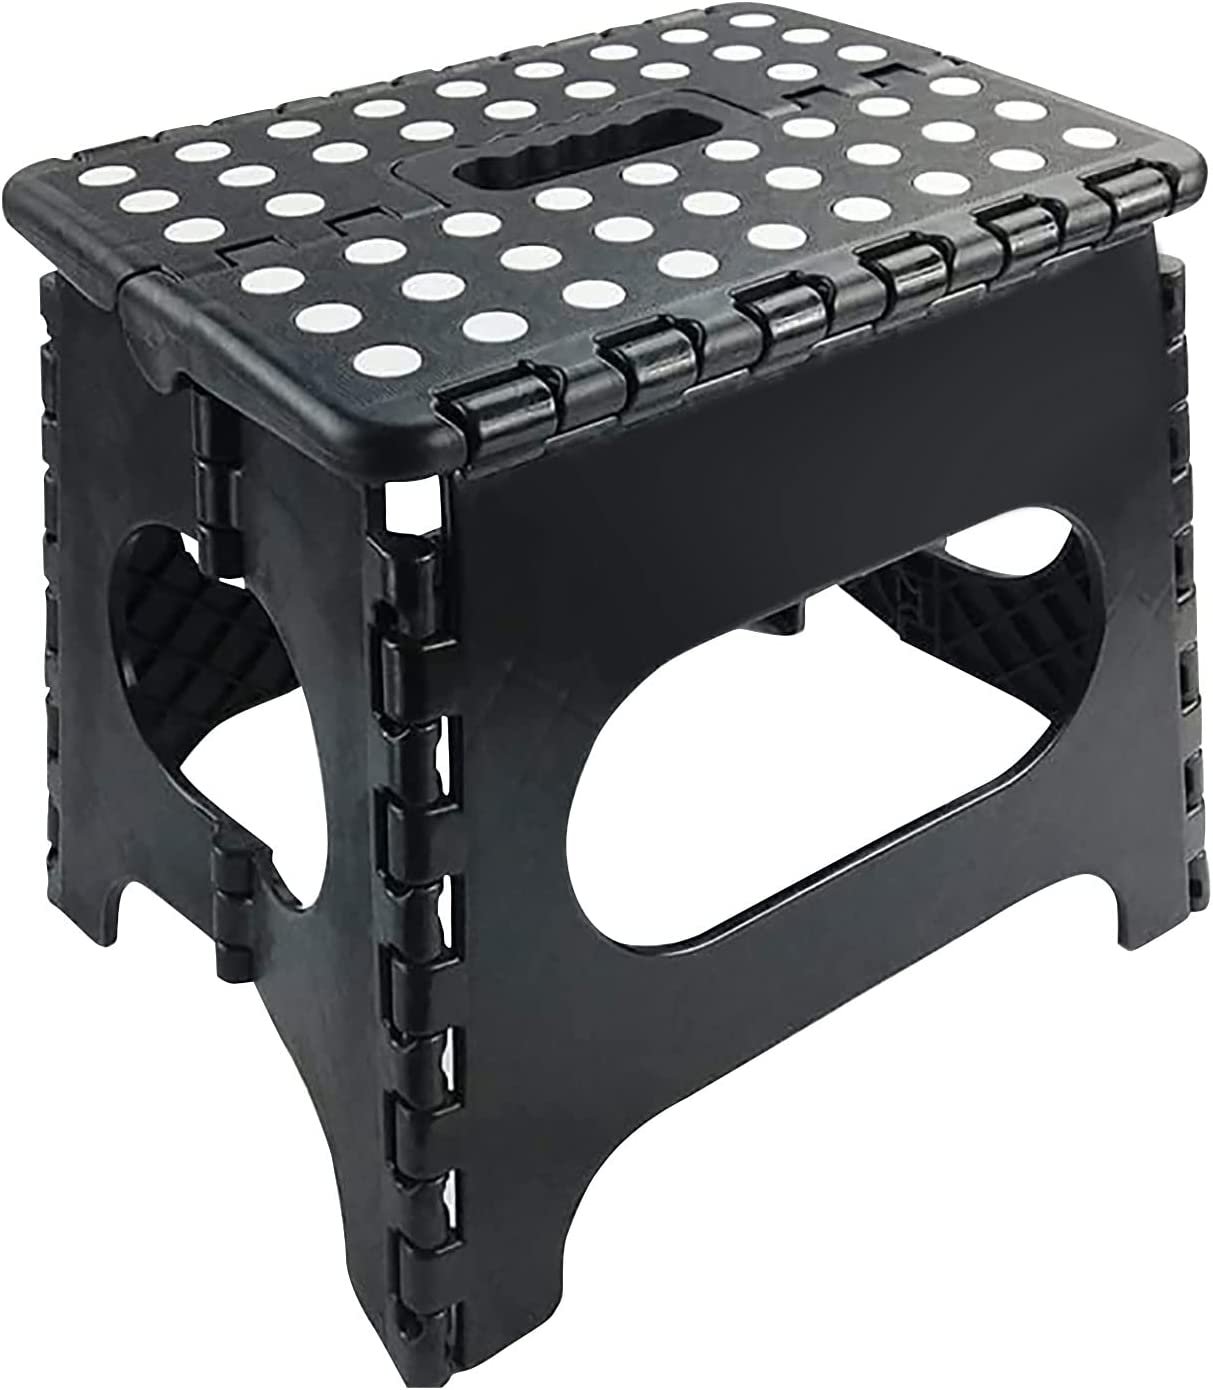 Sterun 11Inch Folding Step Stool With Carry Handle & Anti Skid Footpad For Kids, Adults | Step Stool | Foldable Stool | Collapsible Step Stool | Fold Up Stool | Folding Step